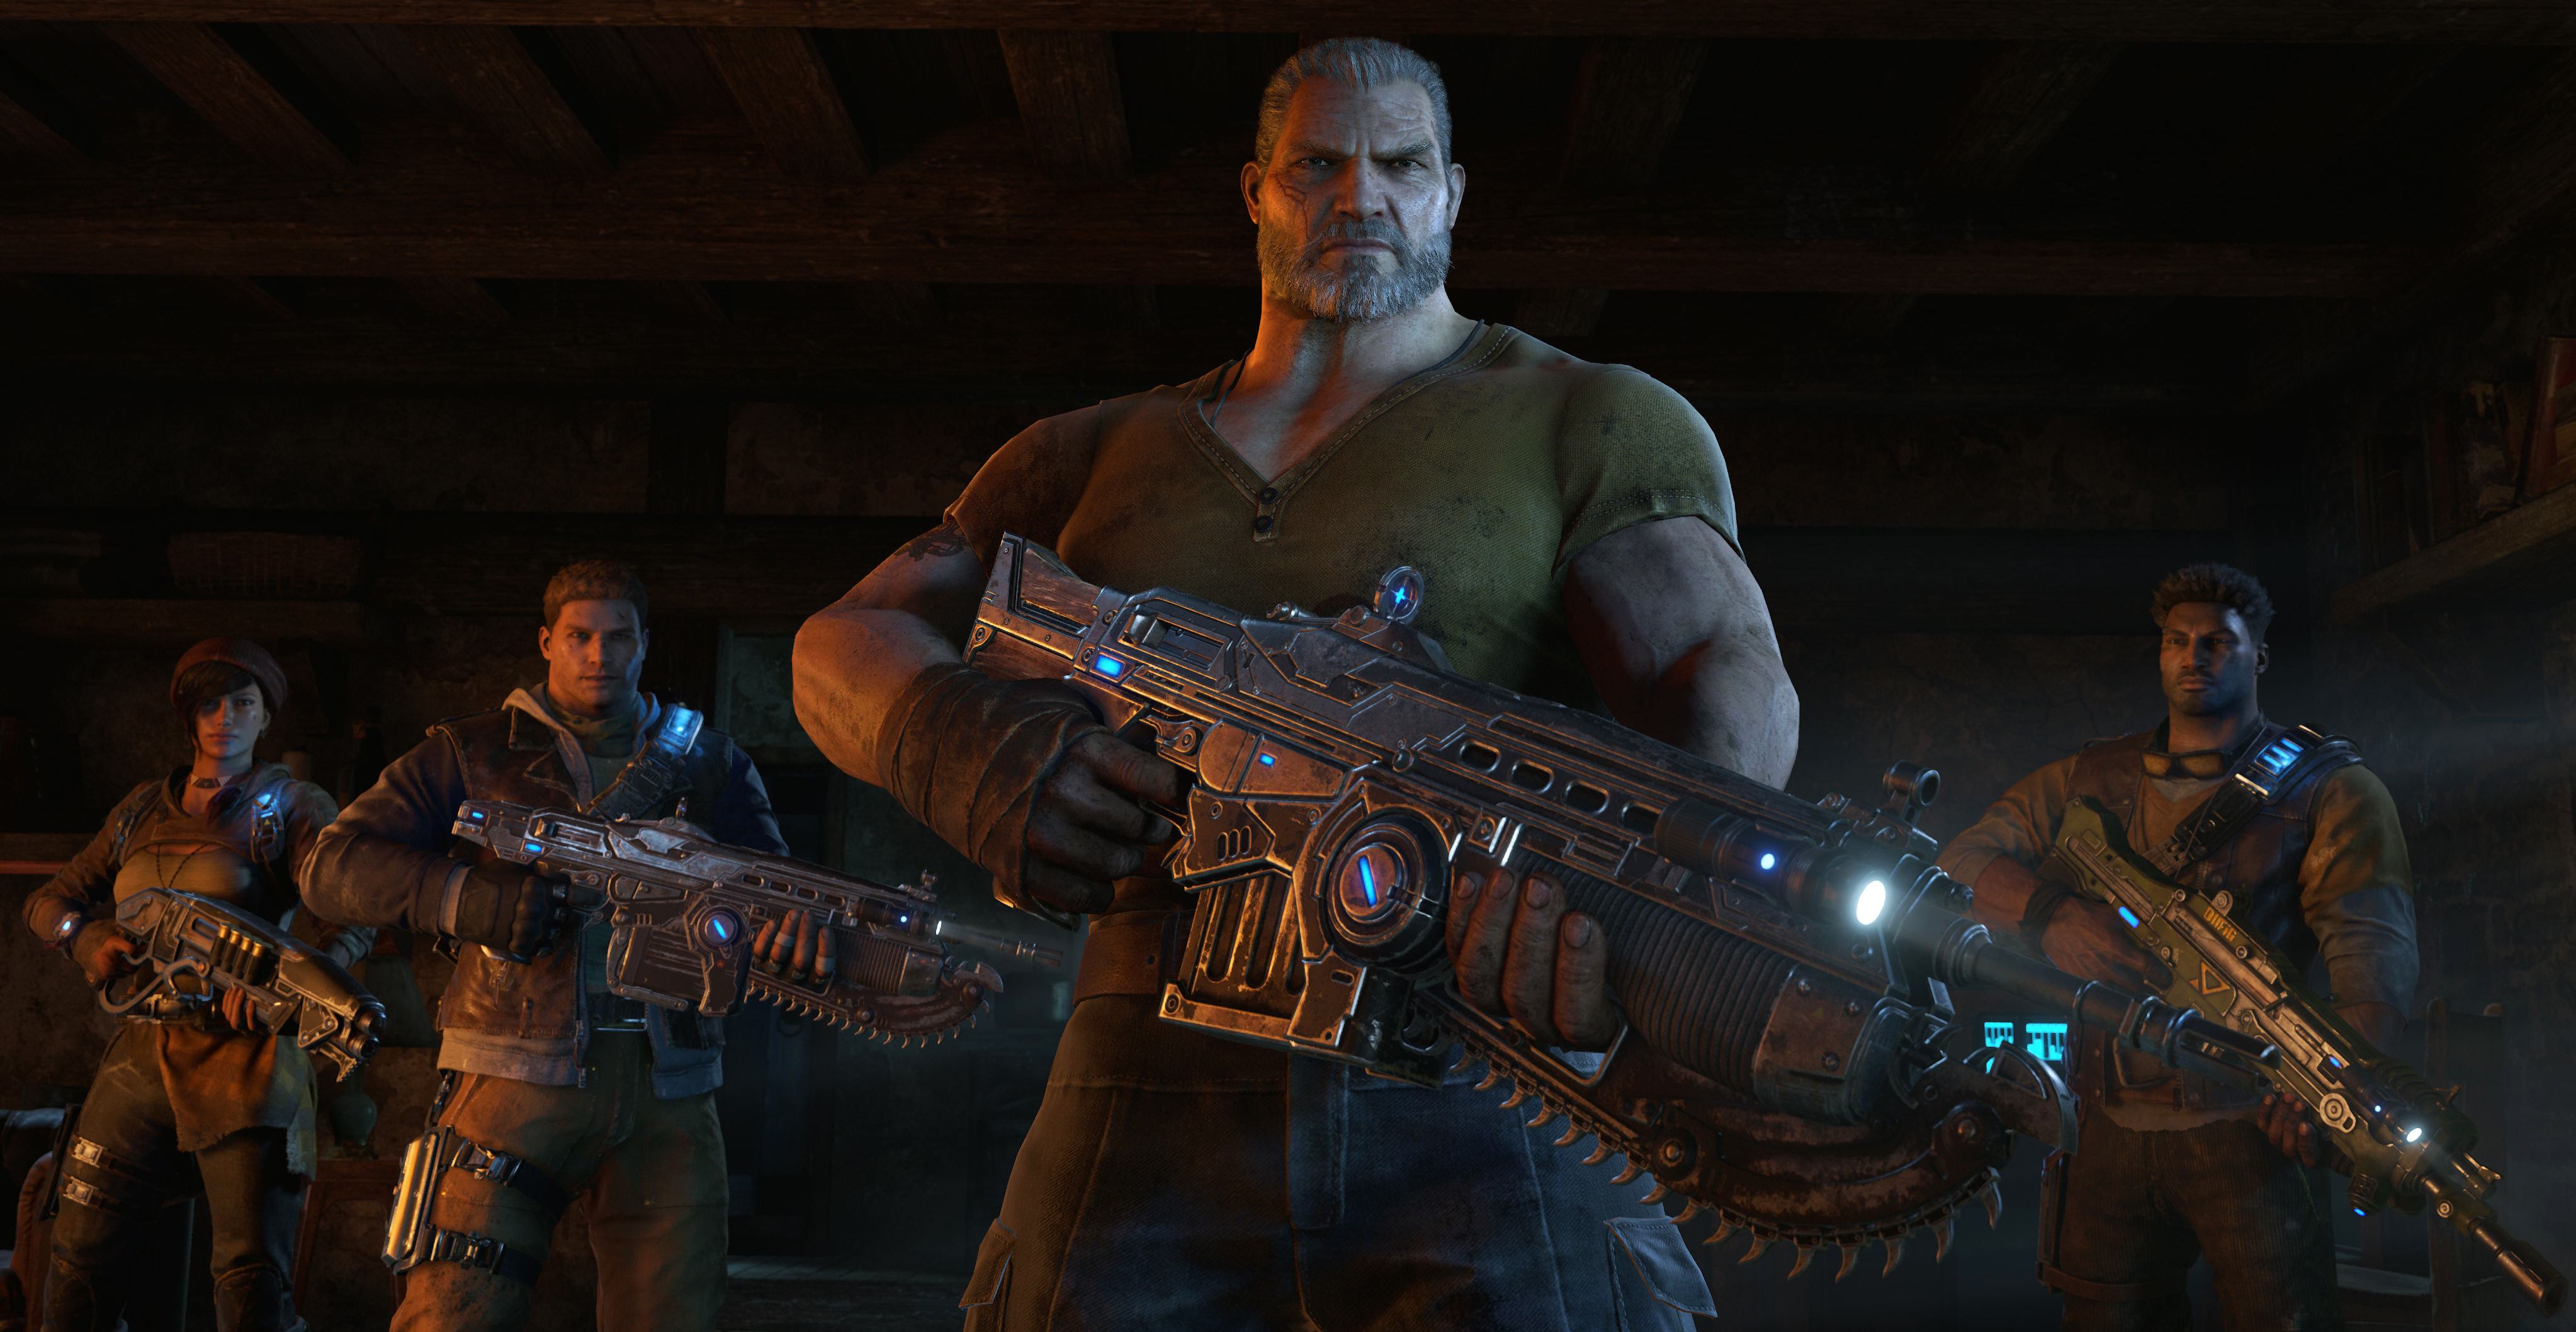 Gears of War studio is switching focus to next-gen, but new game reveals  not due 'for some time